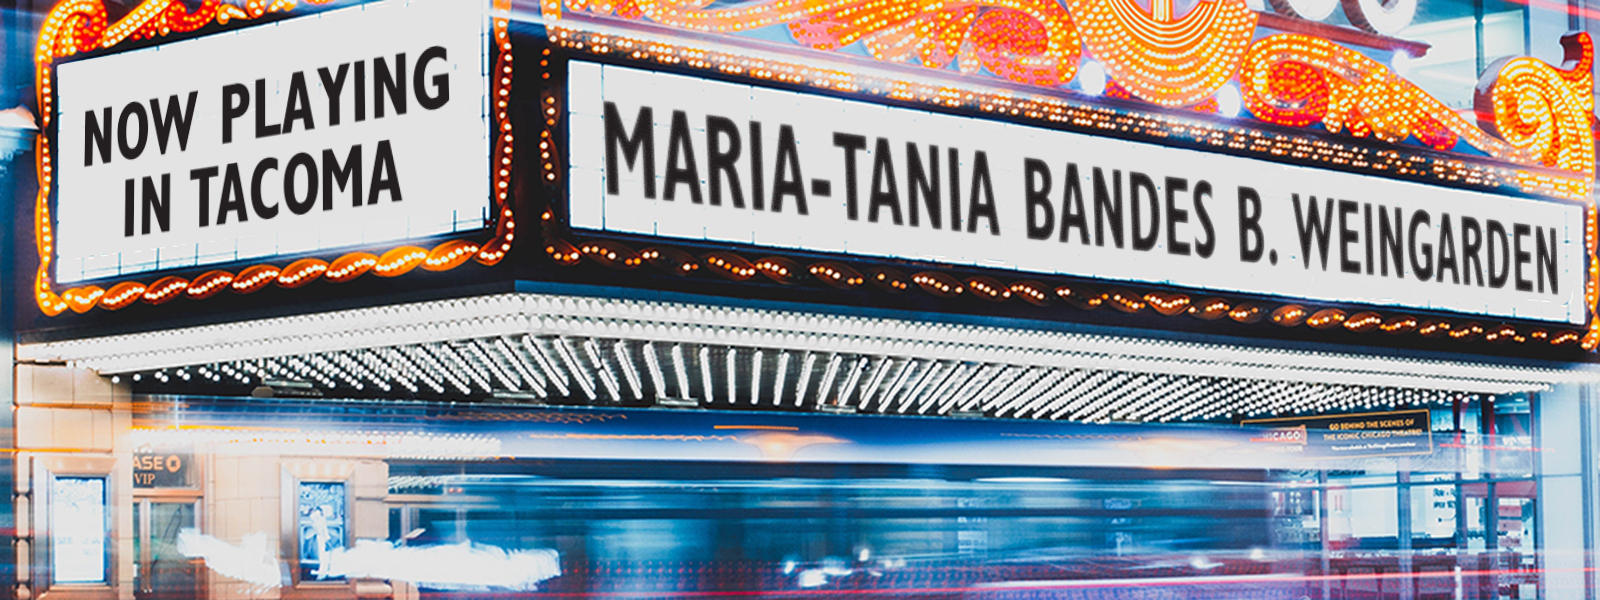 Imaginary theater marquee reading "Now Playing in Tacoma: Maria-Tania Bandes B. Weingarden"